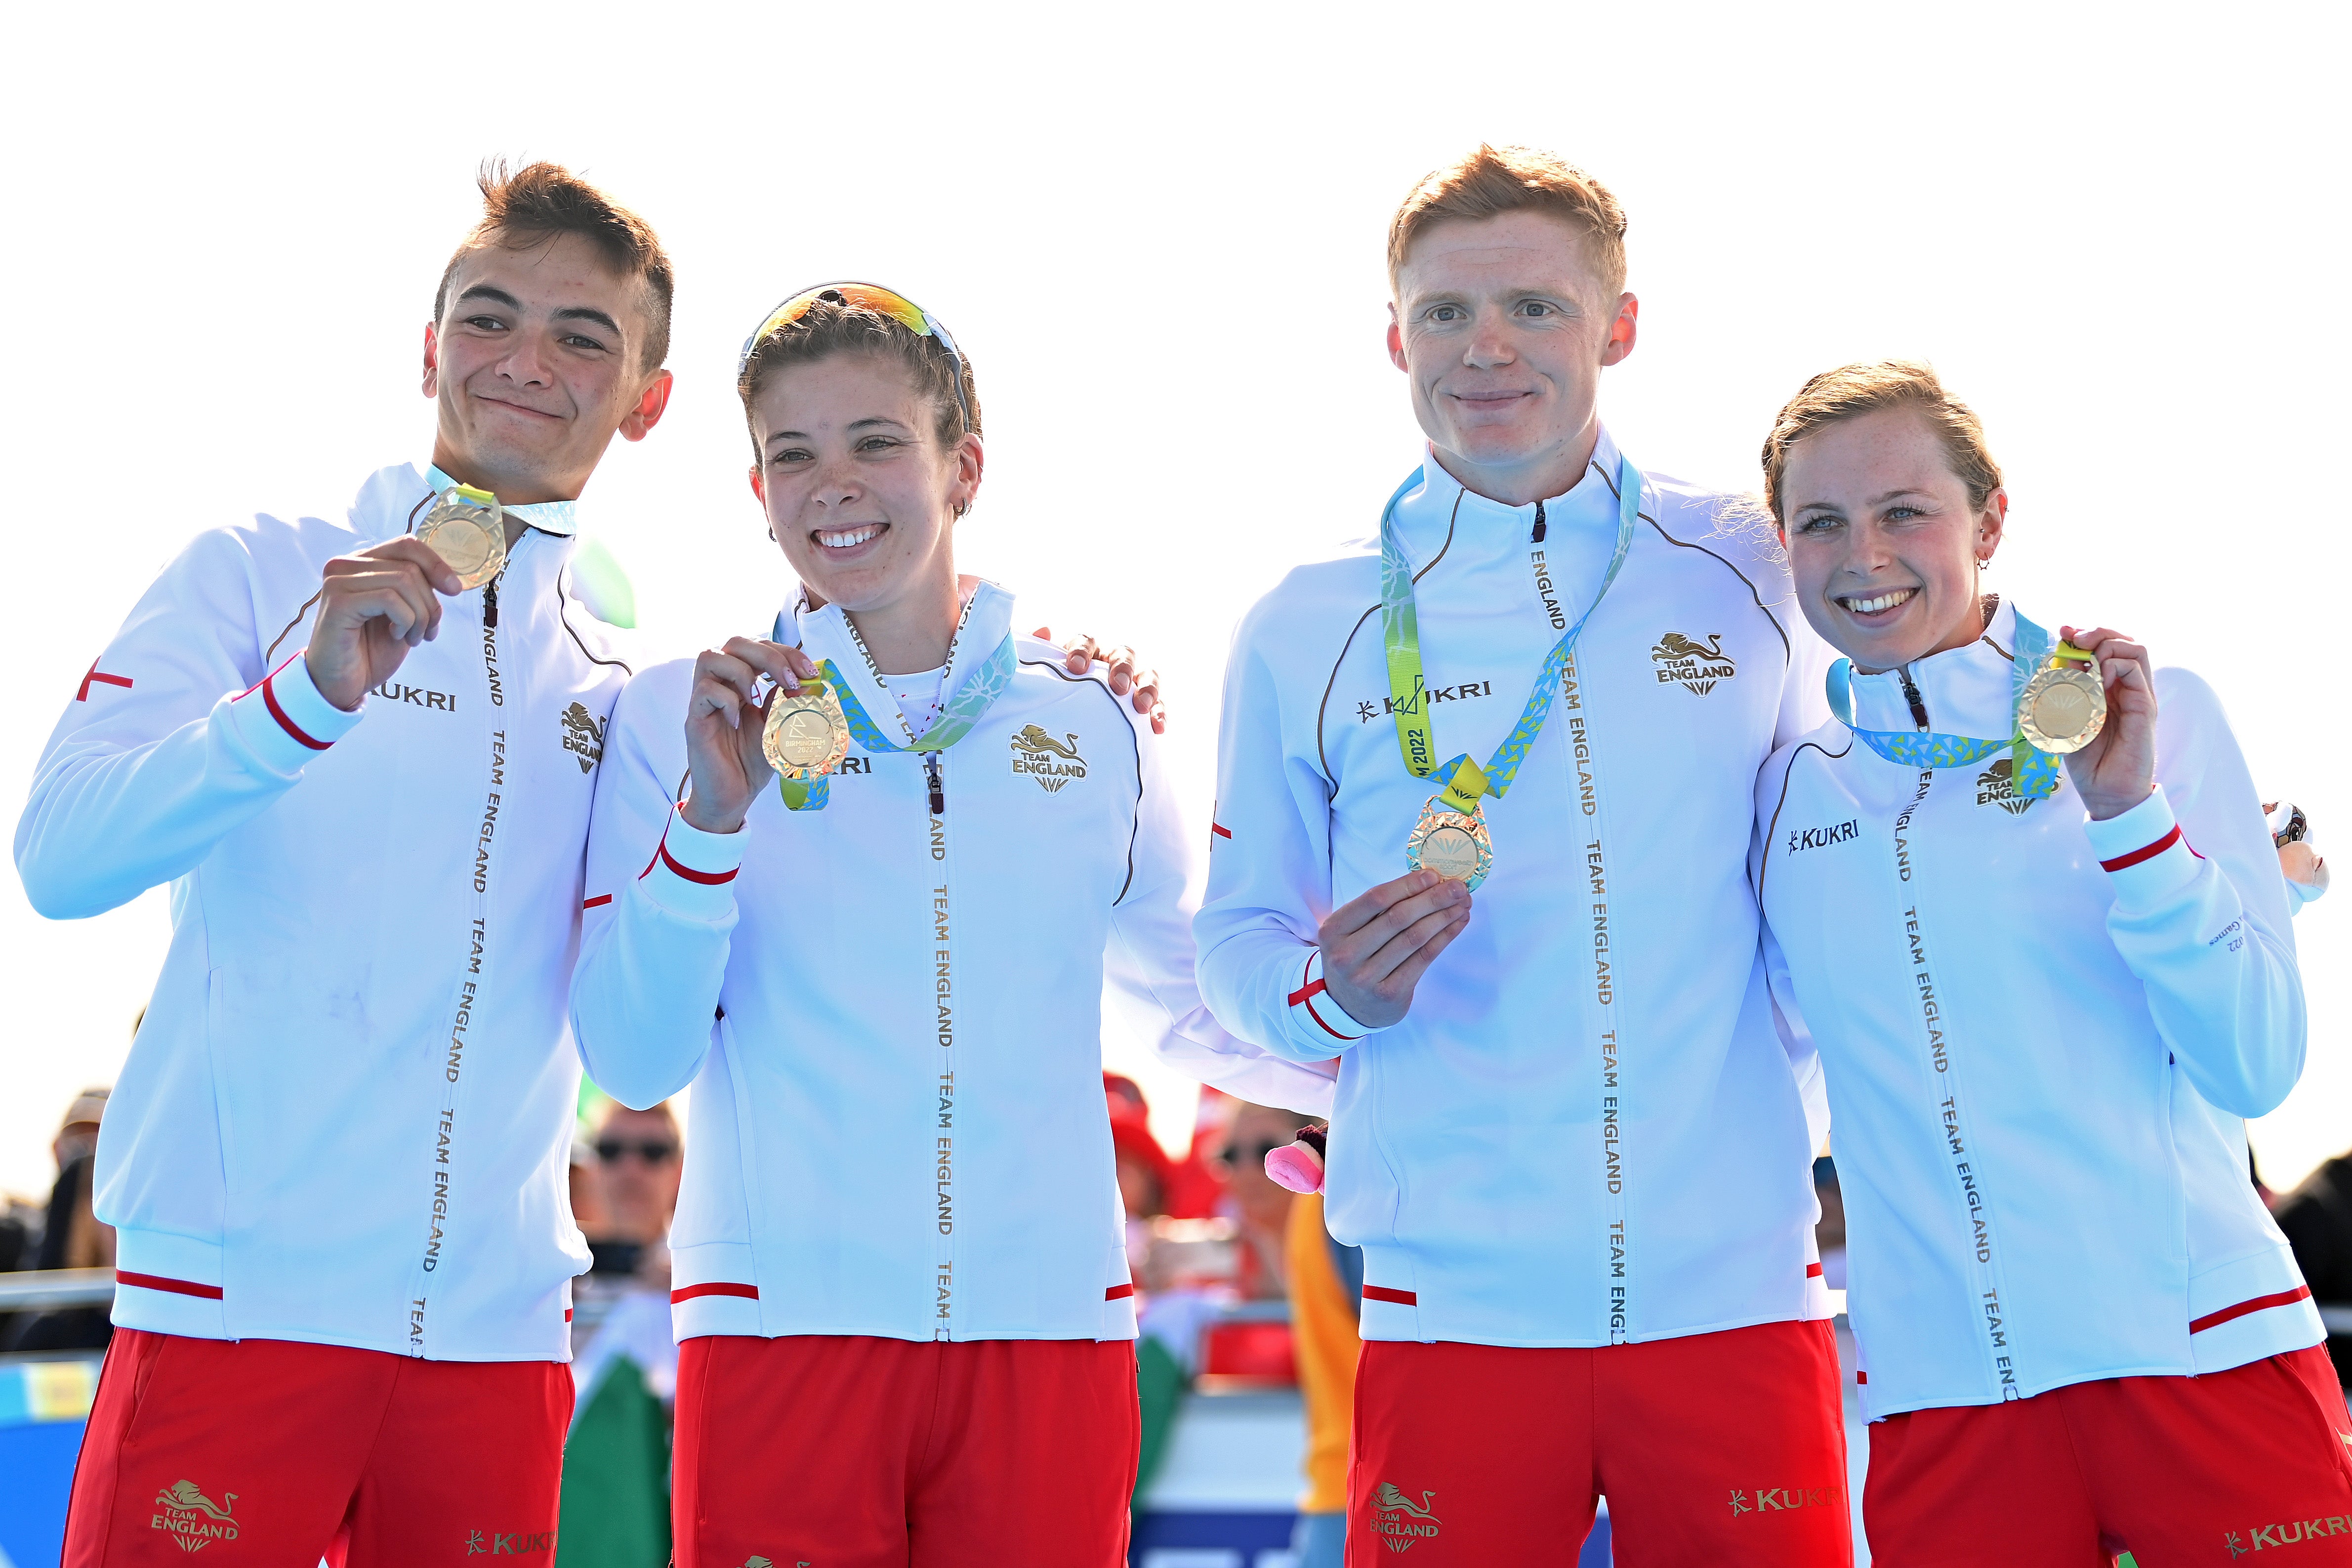 Gold medalist Alex Yee, Sophie Coldwell, Samuel Dickinson and Georgia Taylor-Brown of Team England